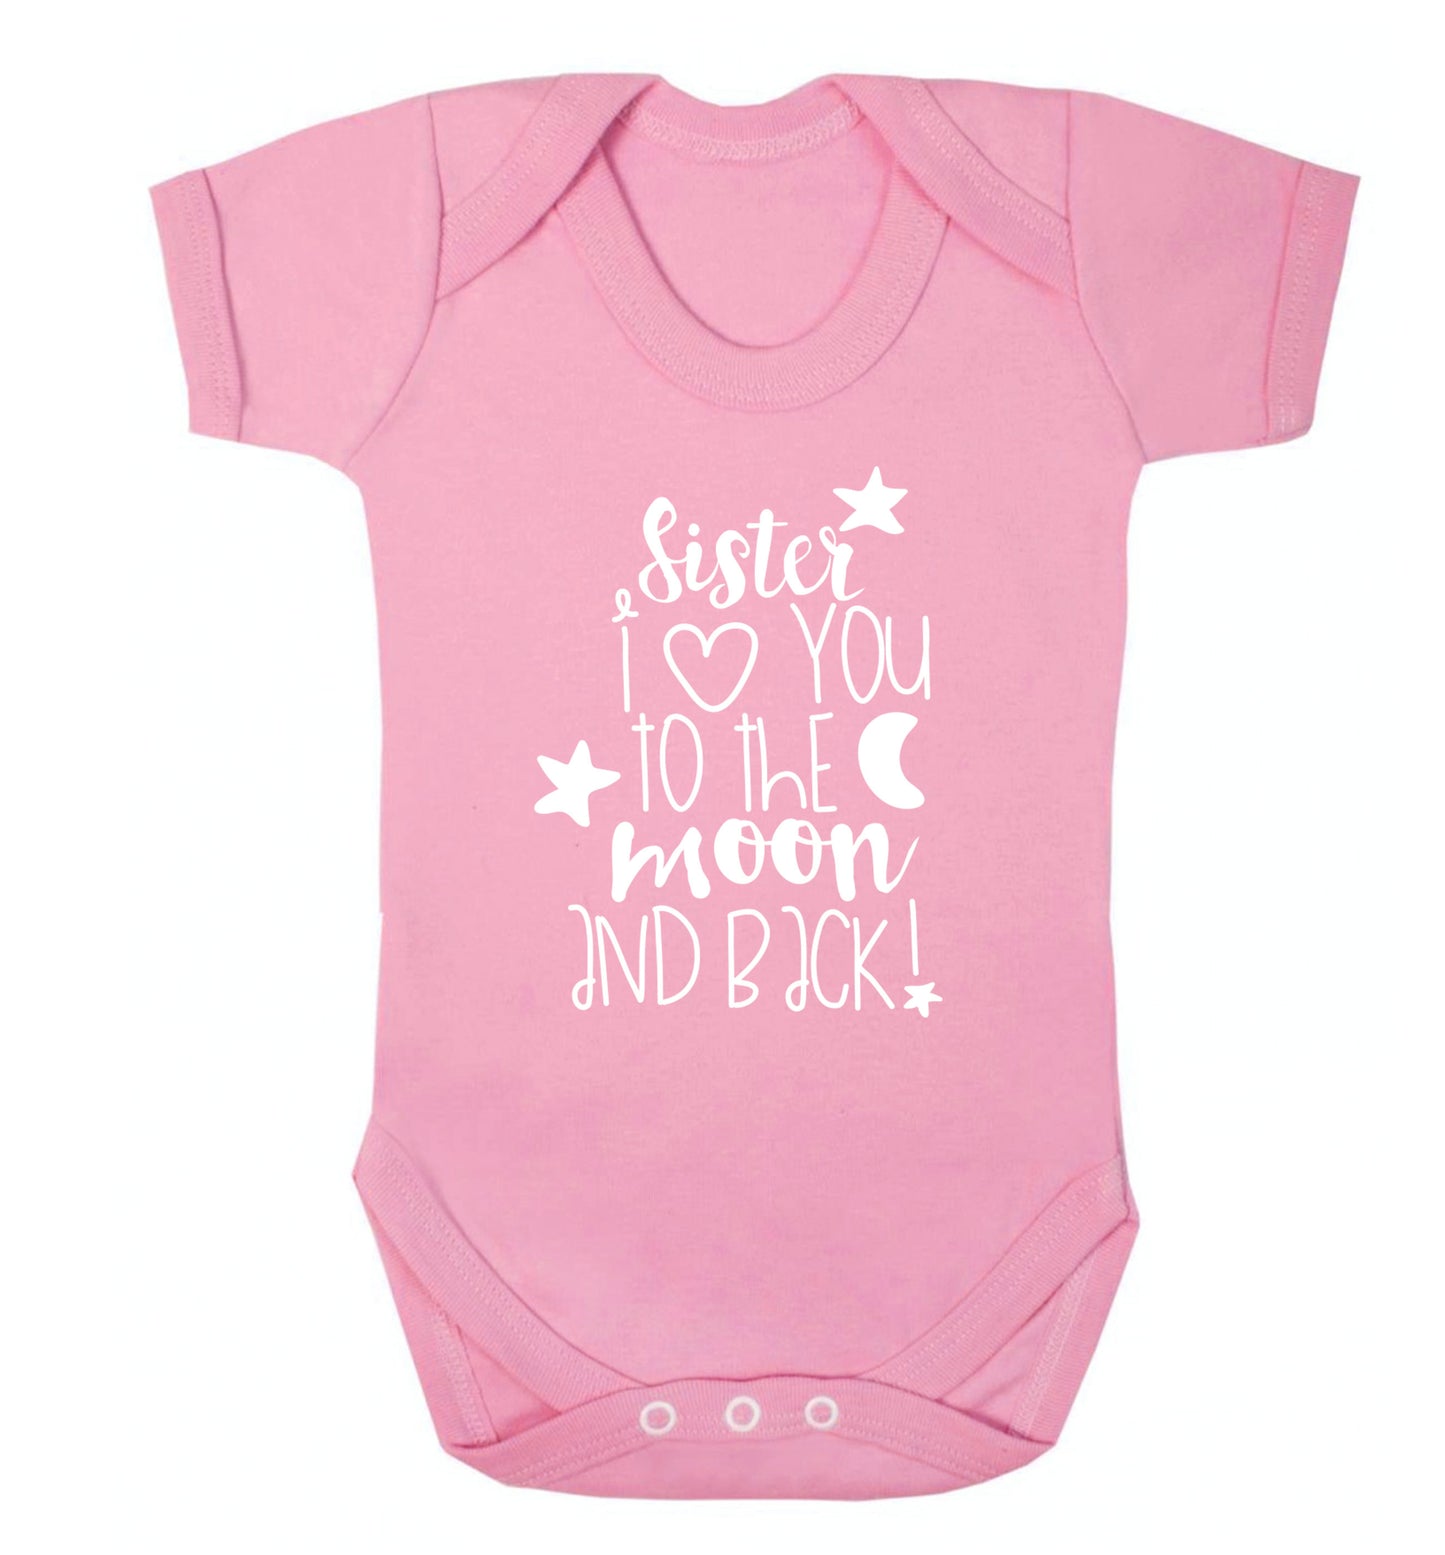 Sister I love you to the moon and back Baby Vest pale pink 18-24 months